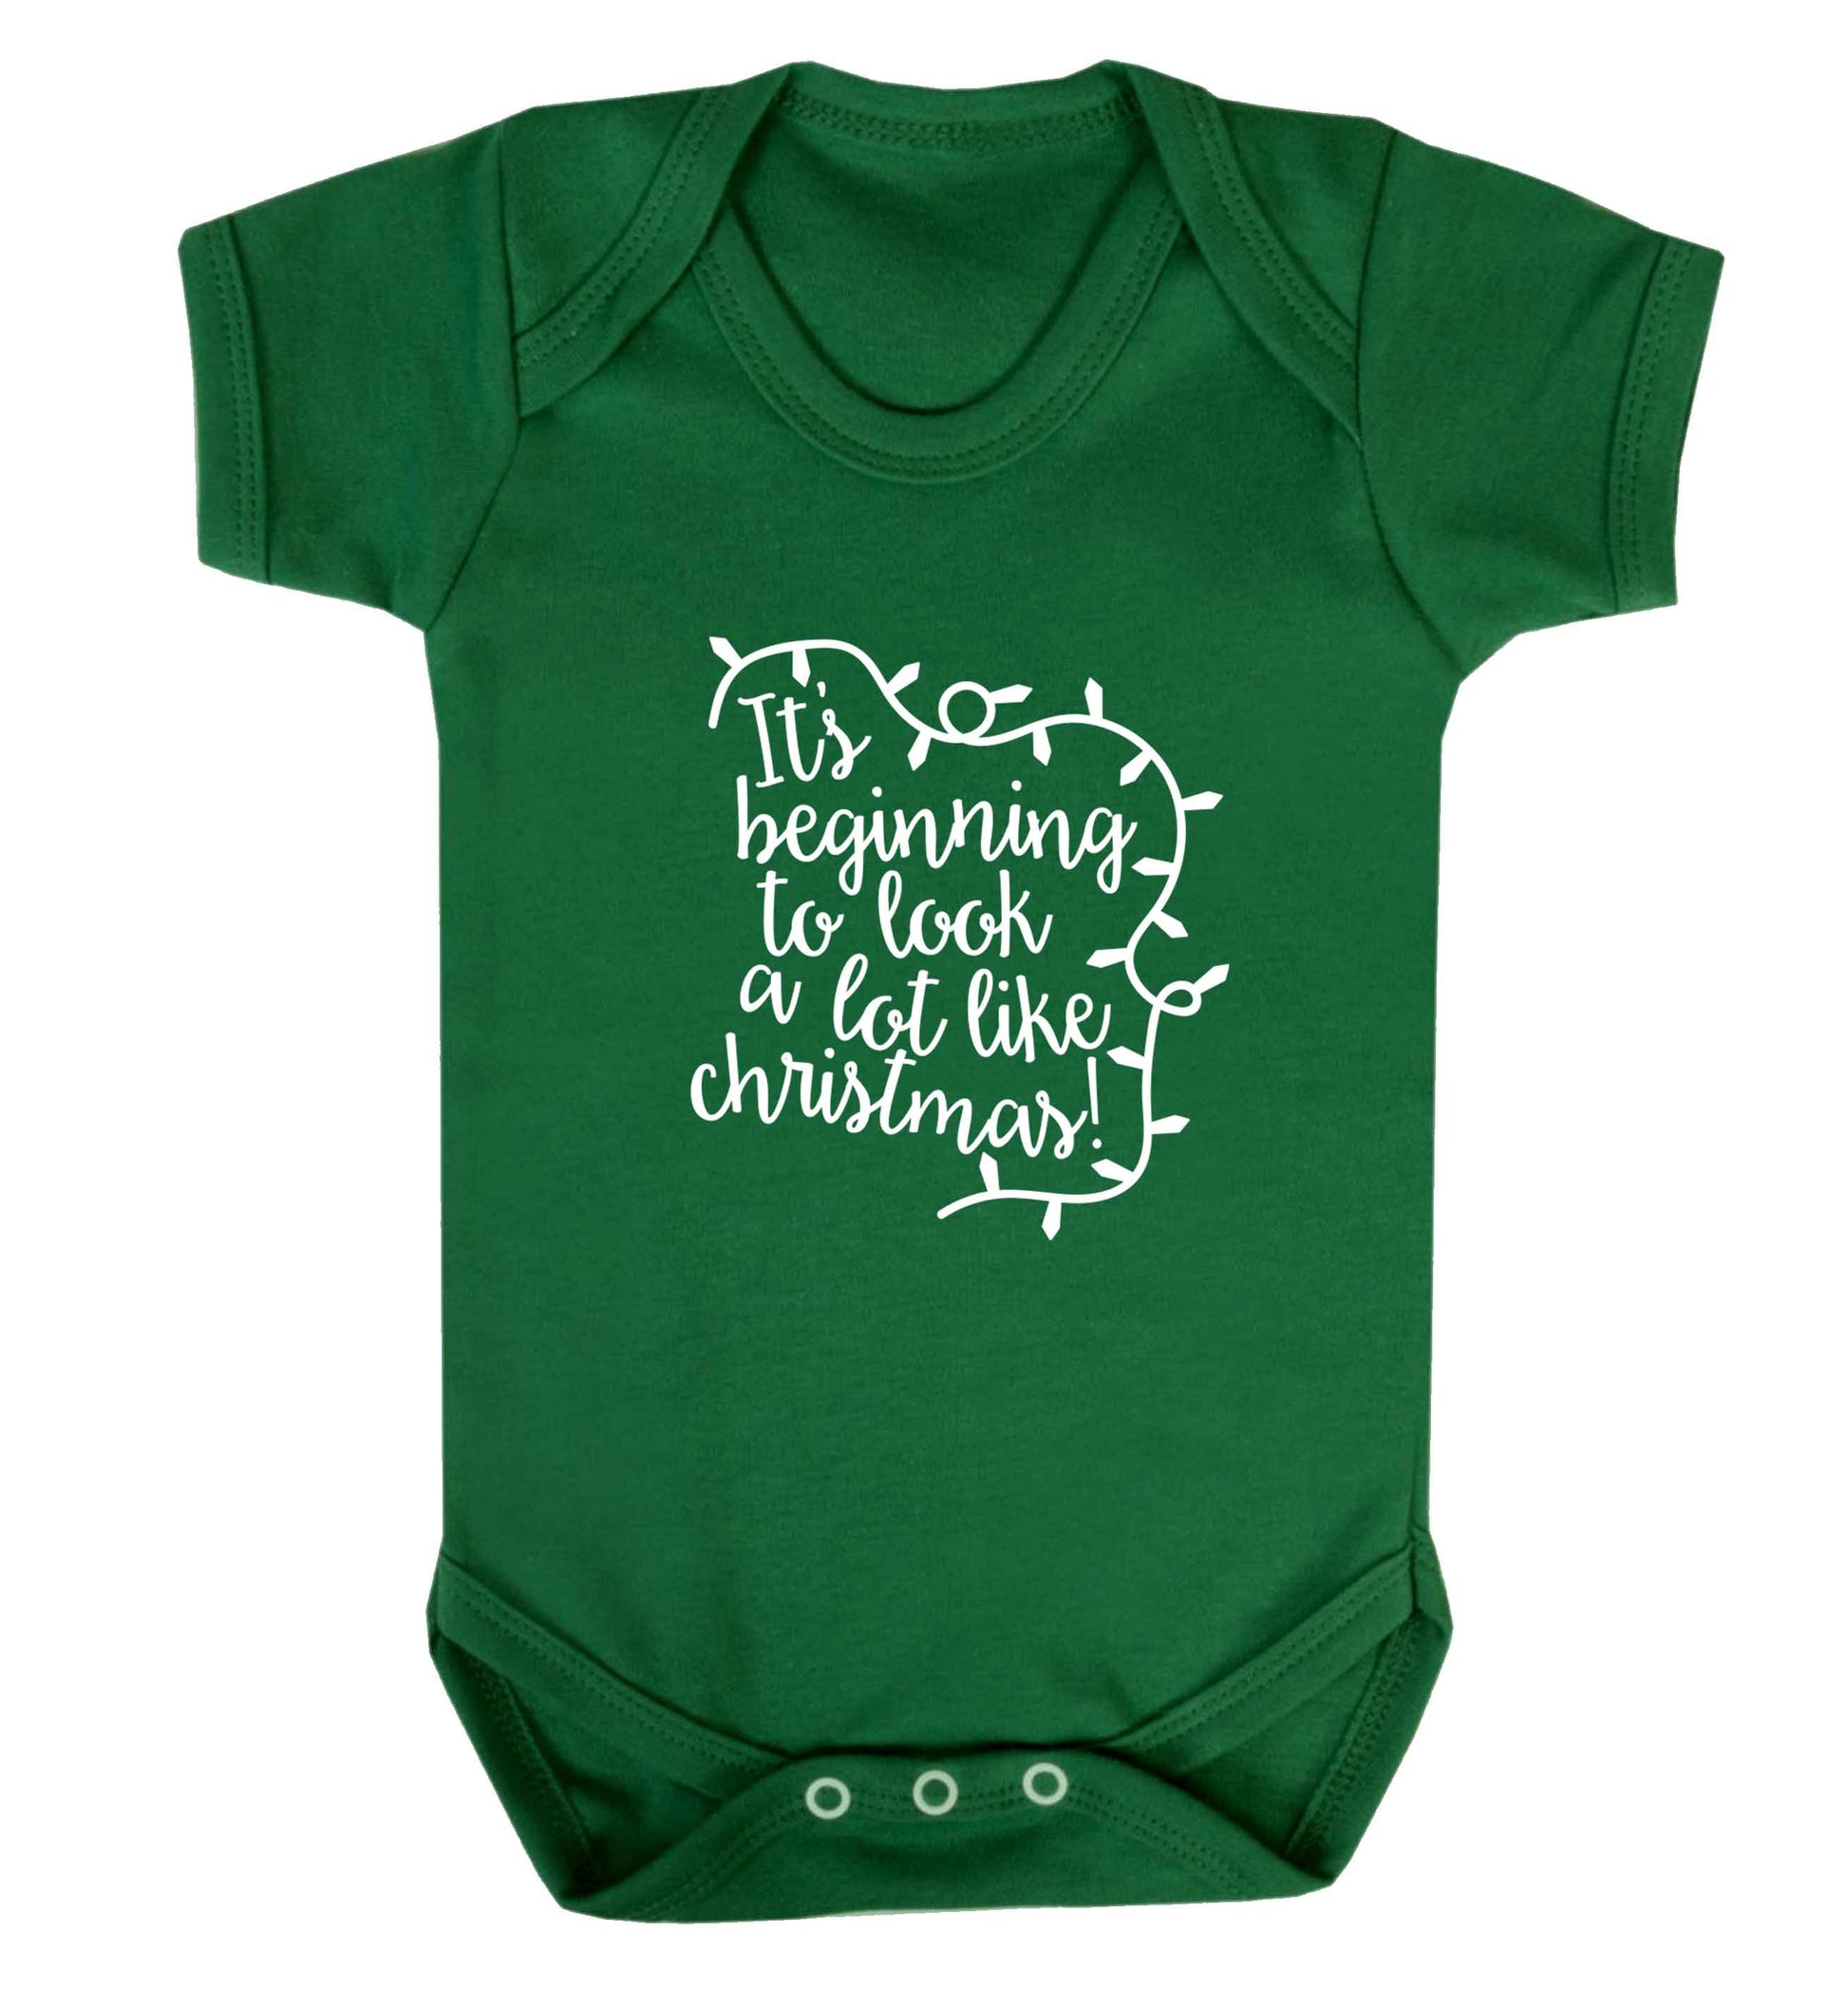 It's beginning to look a lot like Christmas baby vest green 18-24 months